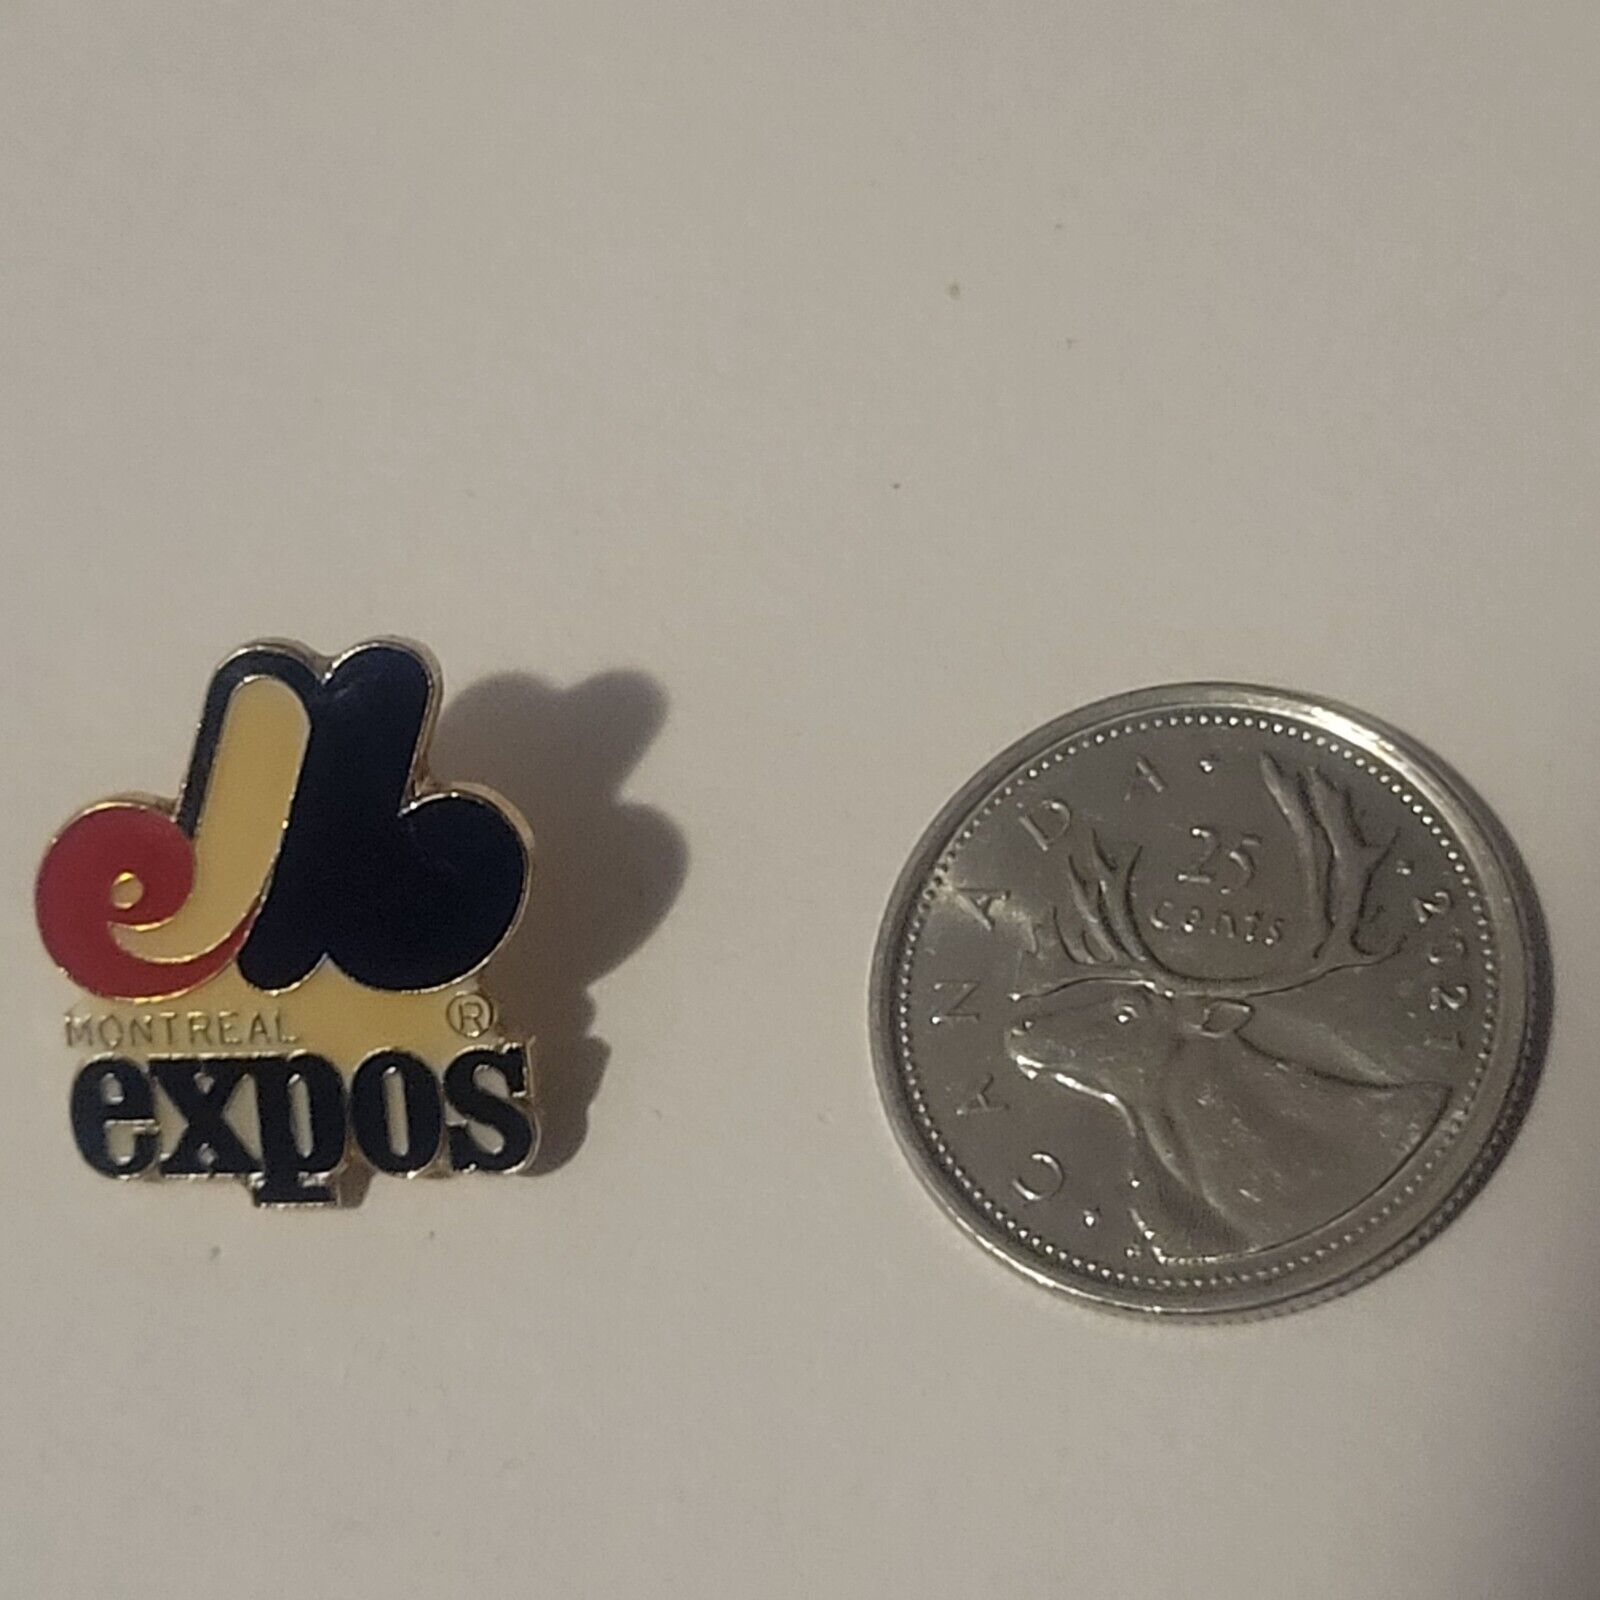 Vintage lapel pin - Montreal Expos